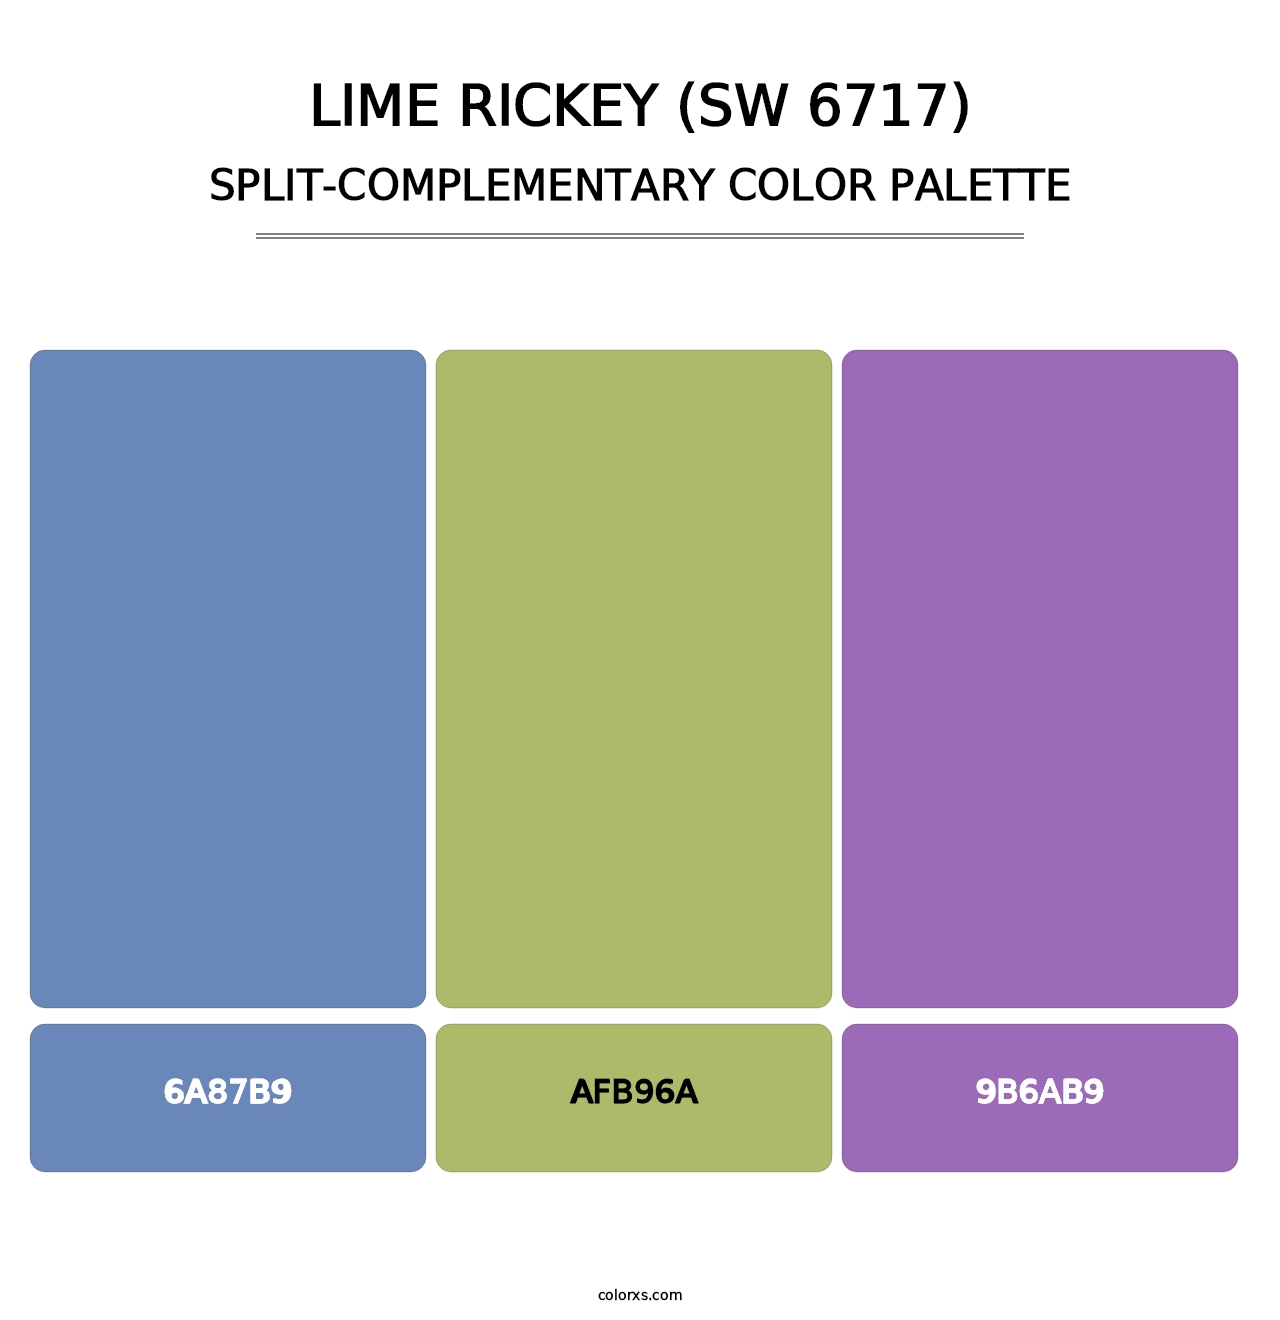 Lime Rickey (SW 6717) - Split-Complementary Color Palette